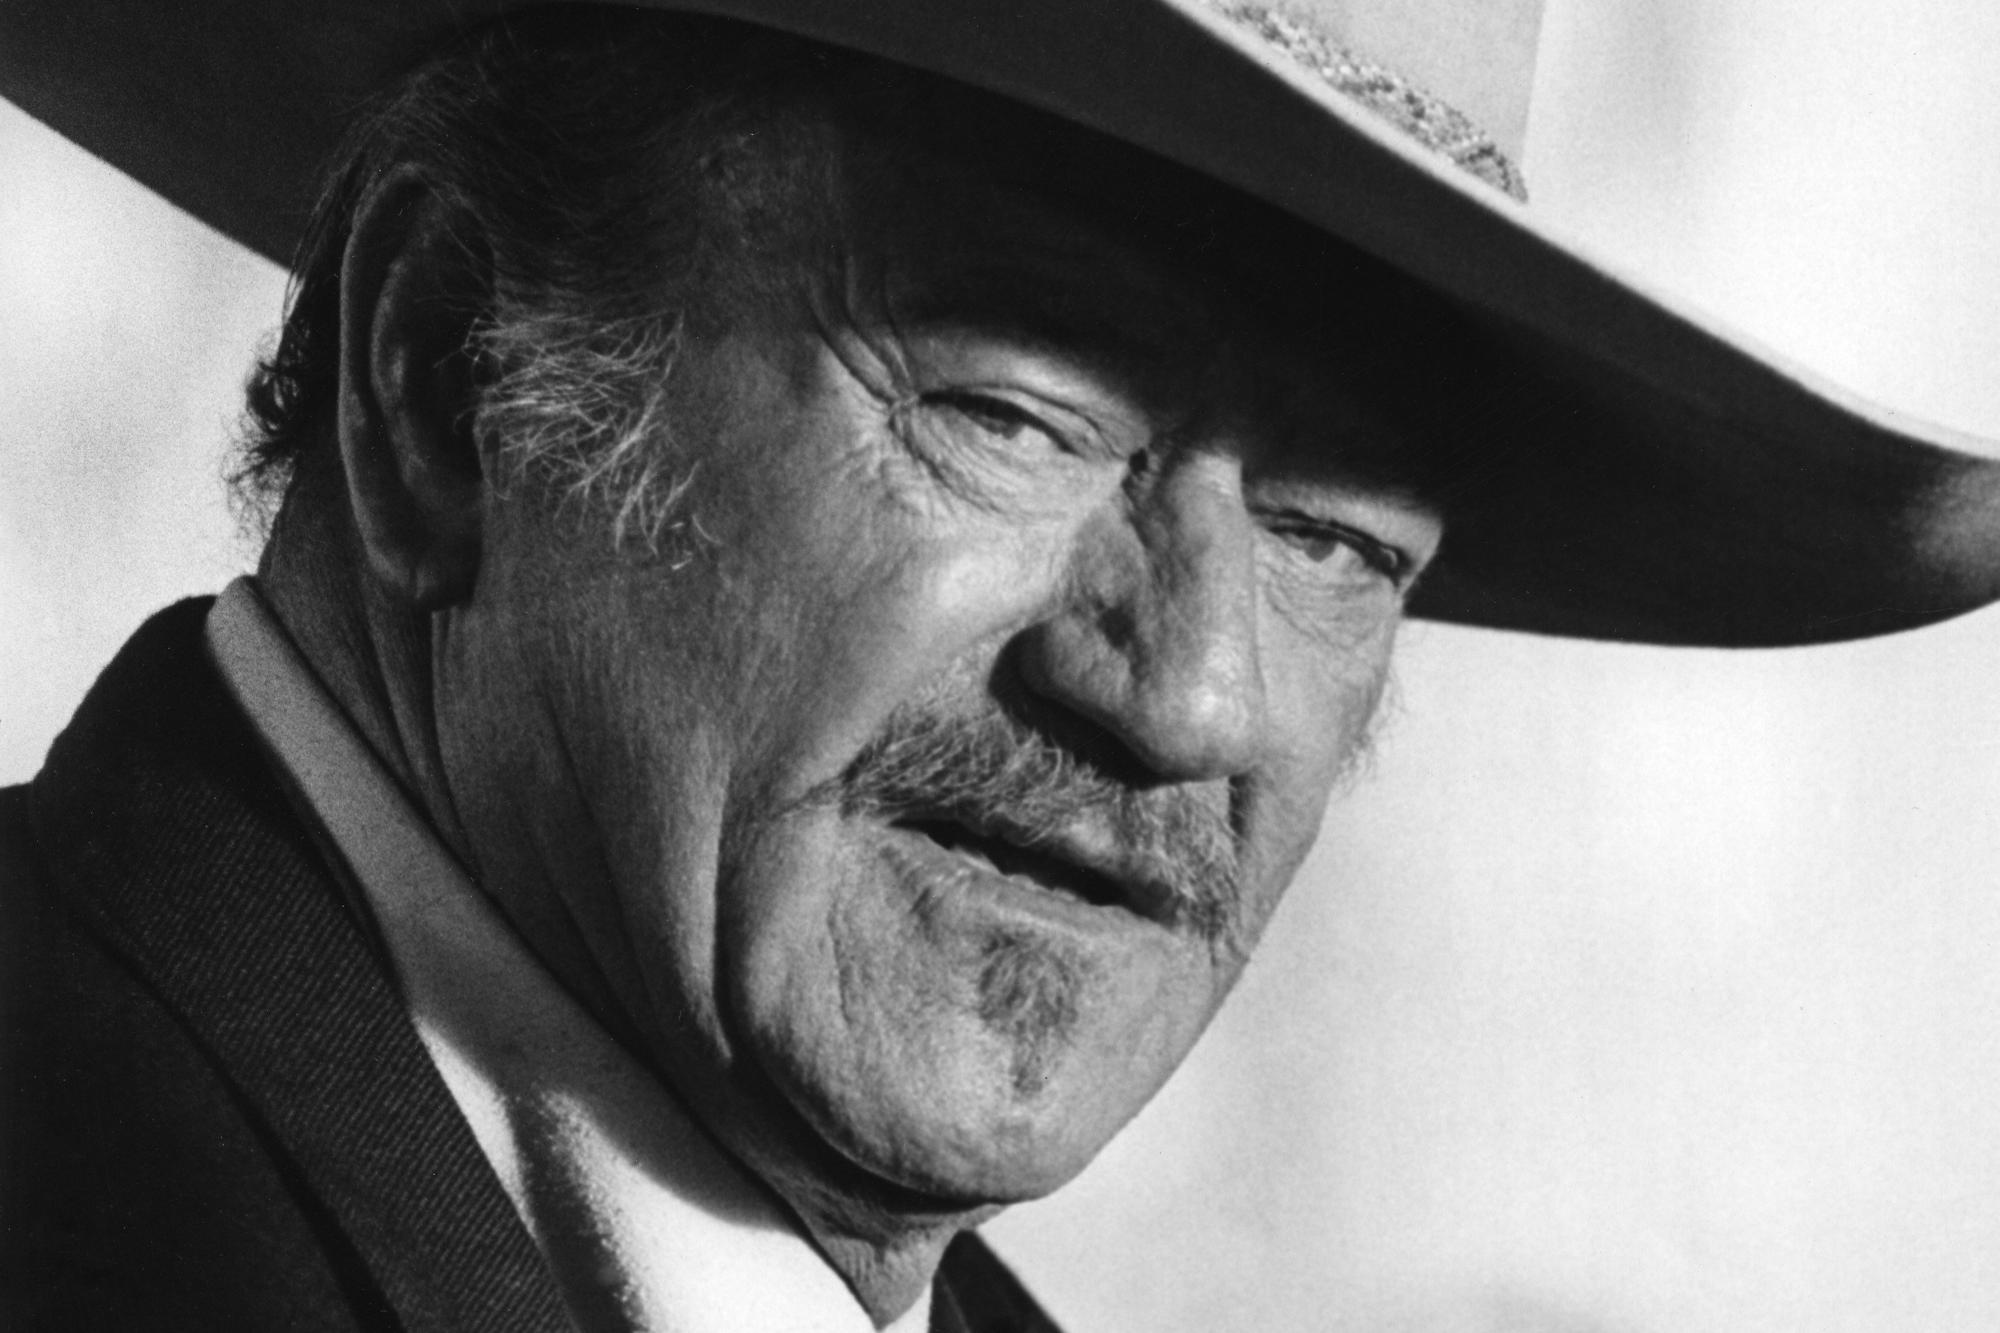 'The Shootist' John Wayne as J.B. Books in a black-and-white photo looking at the camera wearing a Western hat